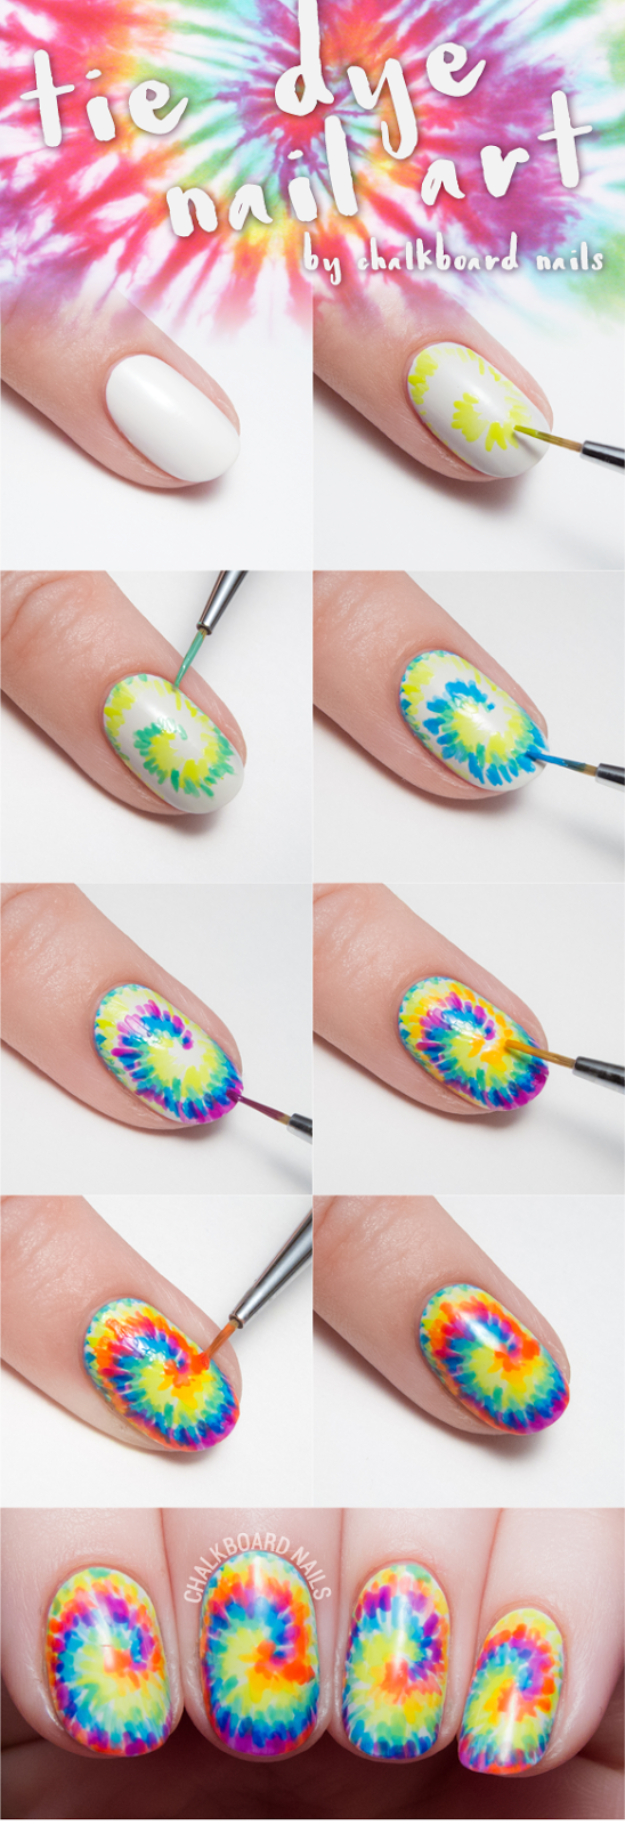 Awesome Nail Art Patterns And Ideas - Tie Dye Nail Art - Step by Step DIY Nail Design Tutorials for Simple Art, Tribal Prints, Best Black and White Manicures. Easy and Fun Colors, Shapes and Designs for Your Nails 